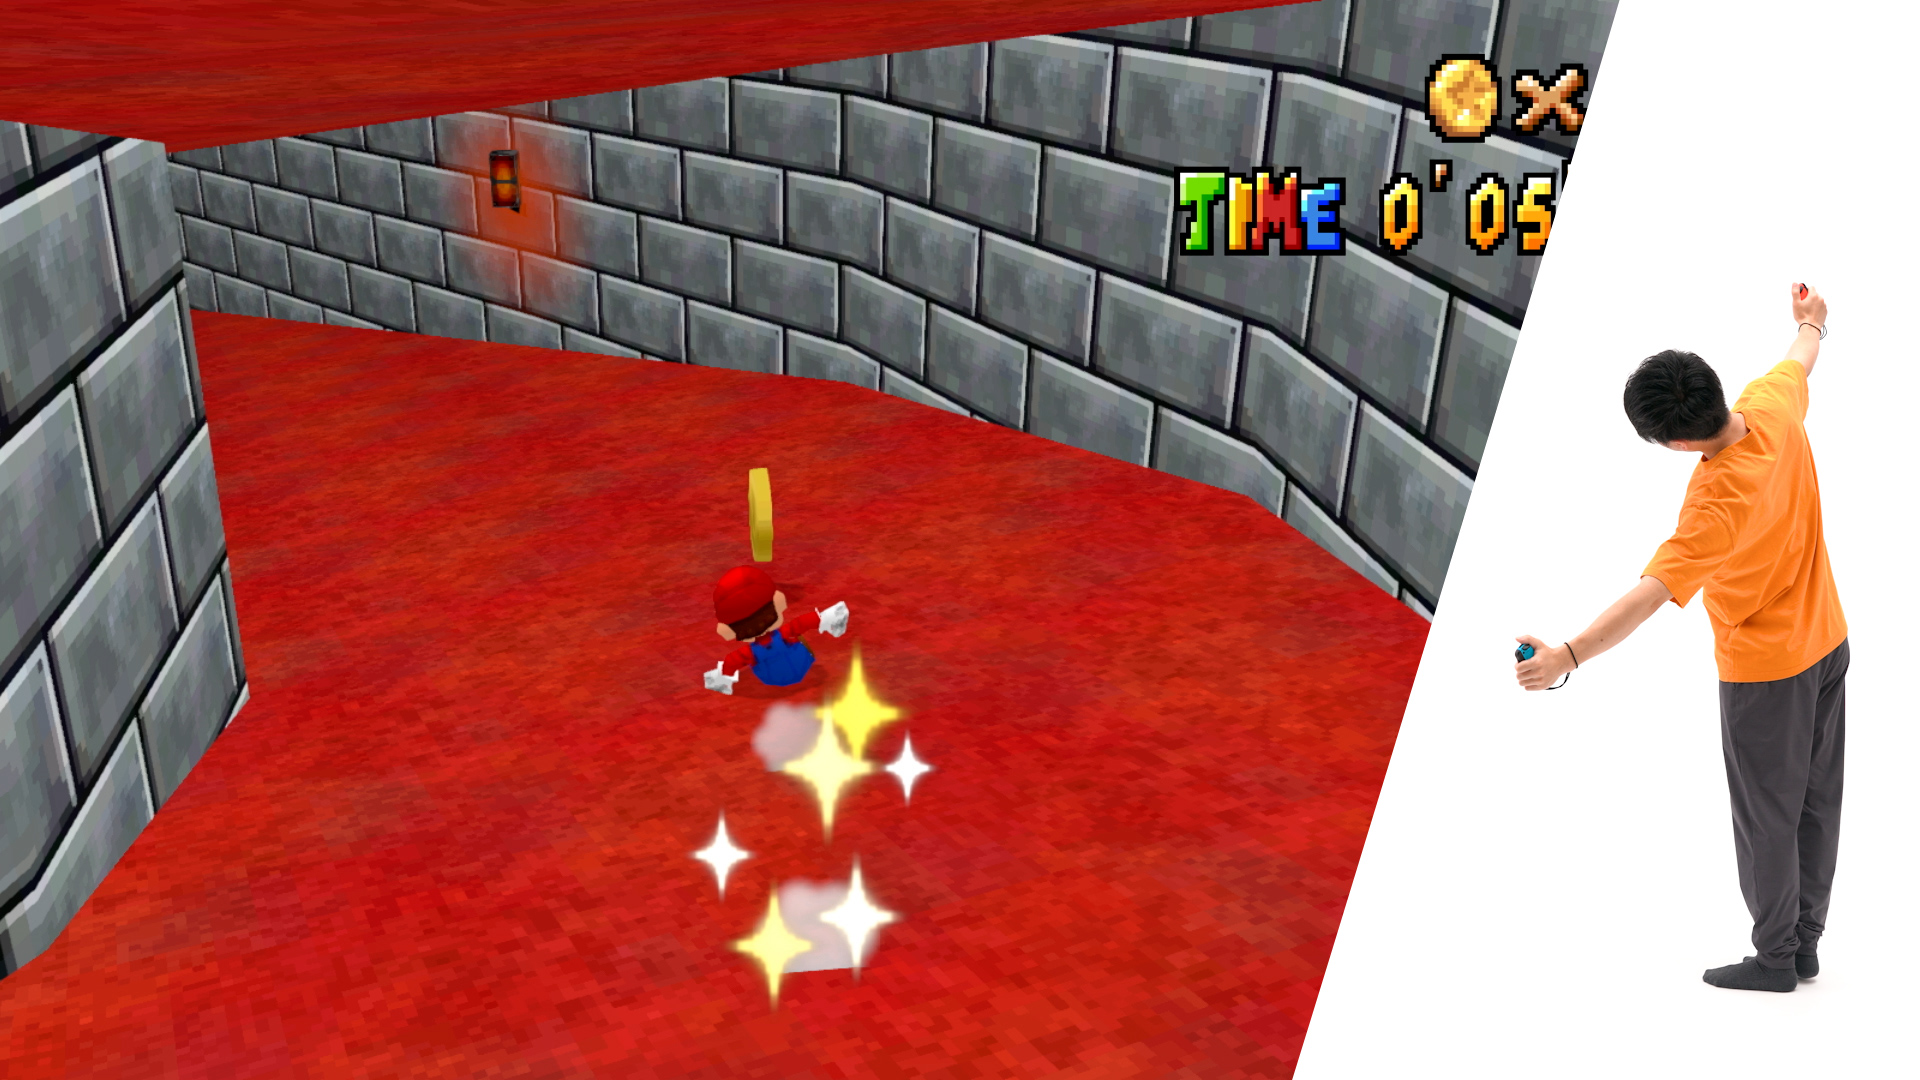 Mario slides down a tunnel in a recreation of the Super Mario 64 level in WarioWare: Move It! Inset is a photo of a player leaning to the left, arms outstretched to mimic Mario’s pose.